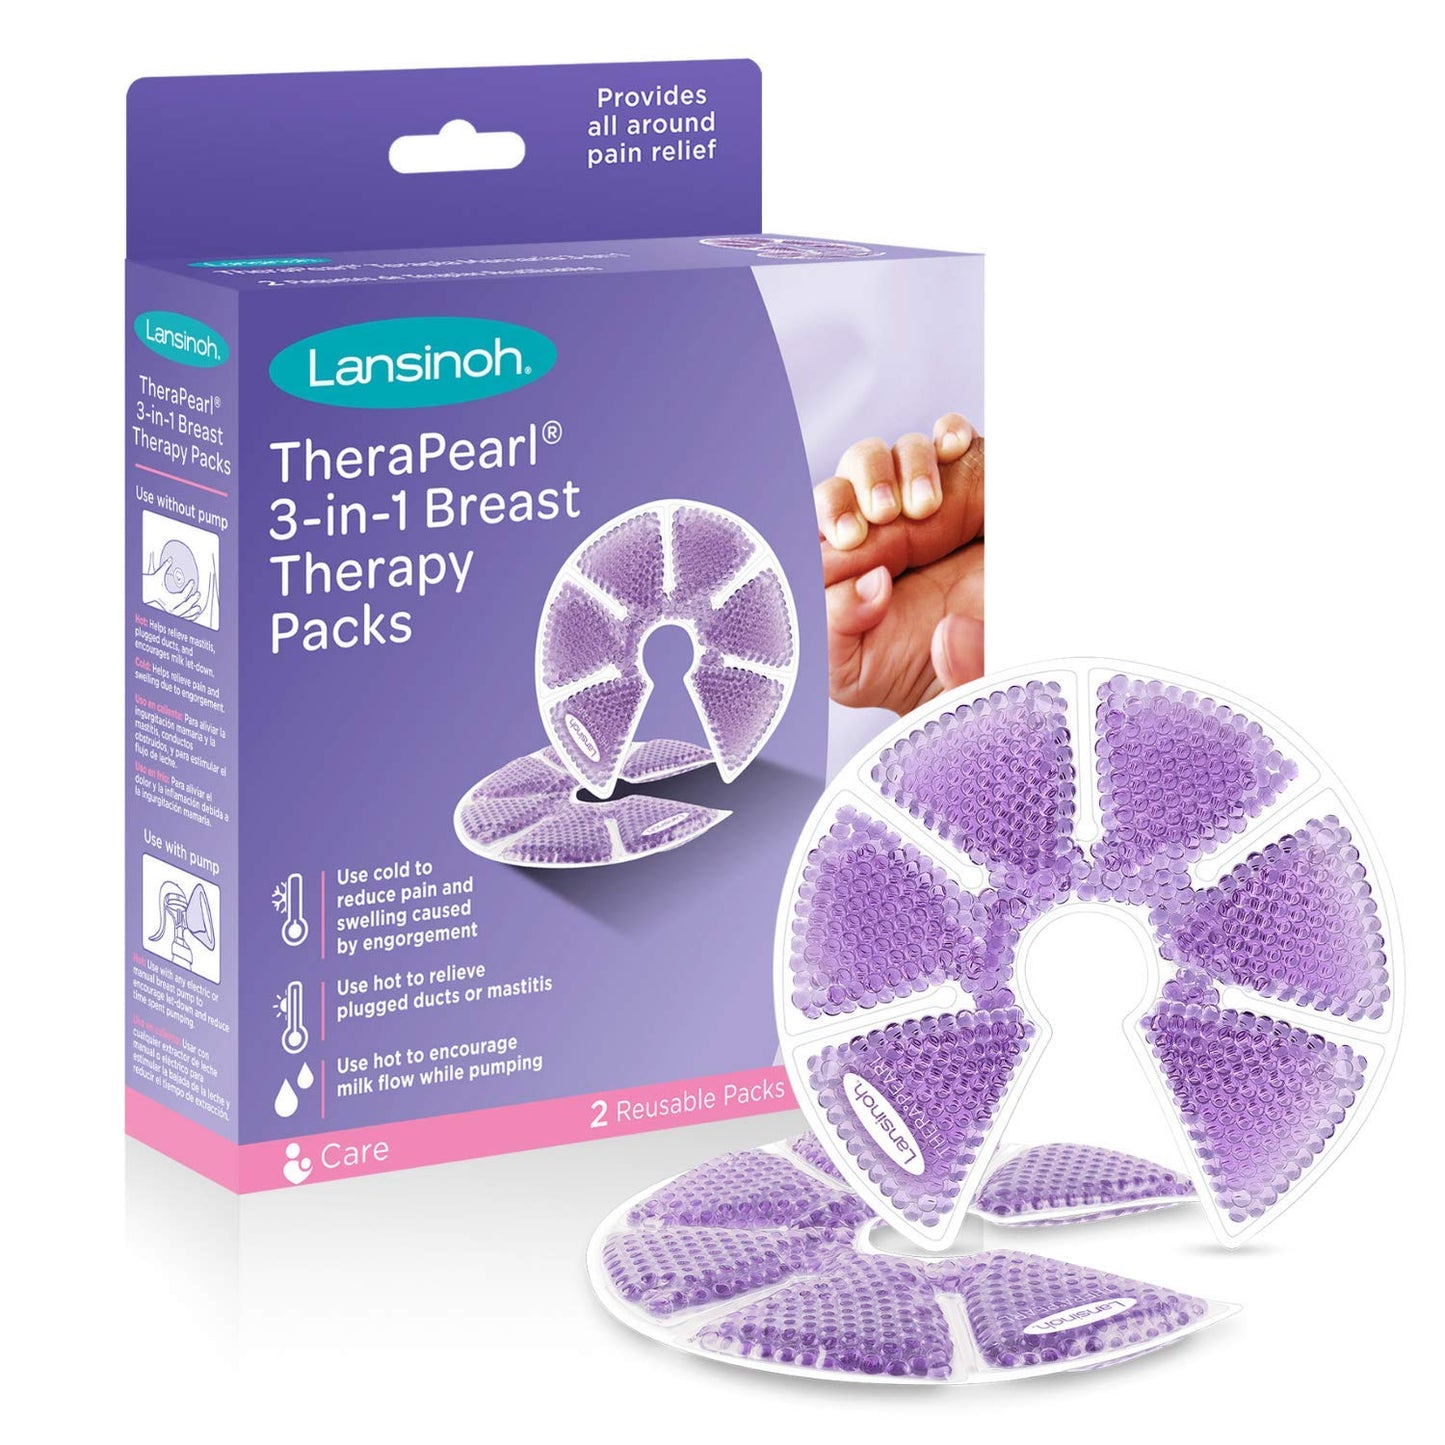 THERA°PEARL® 3-in-1 Breast Therapy